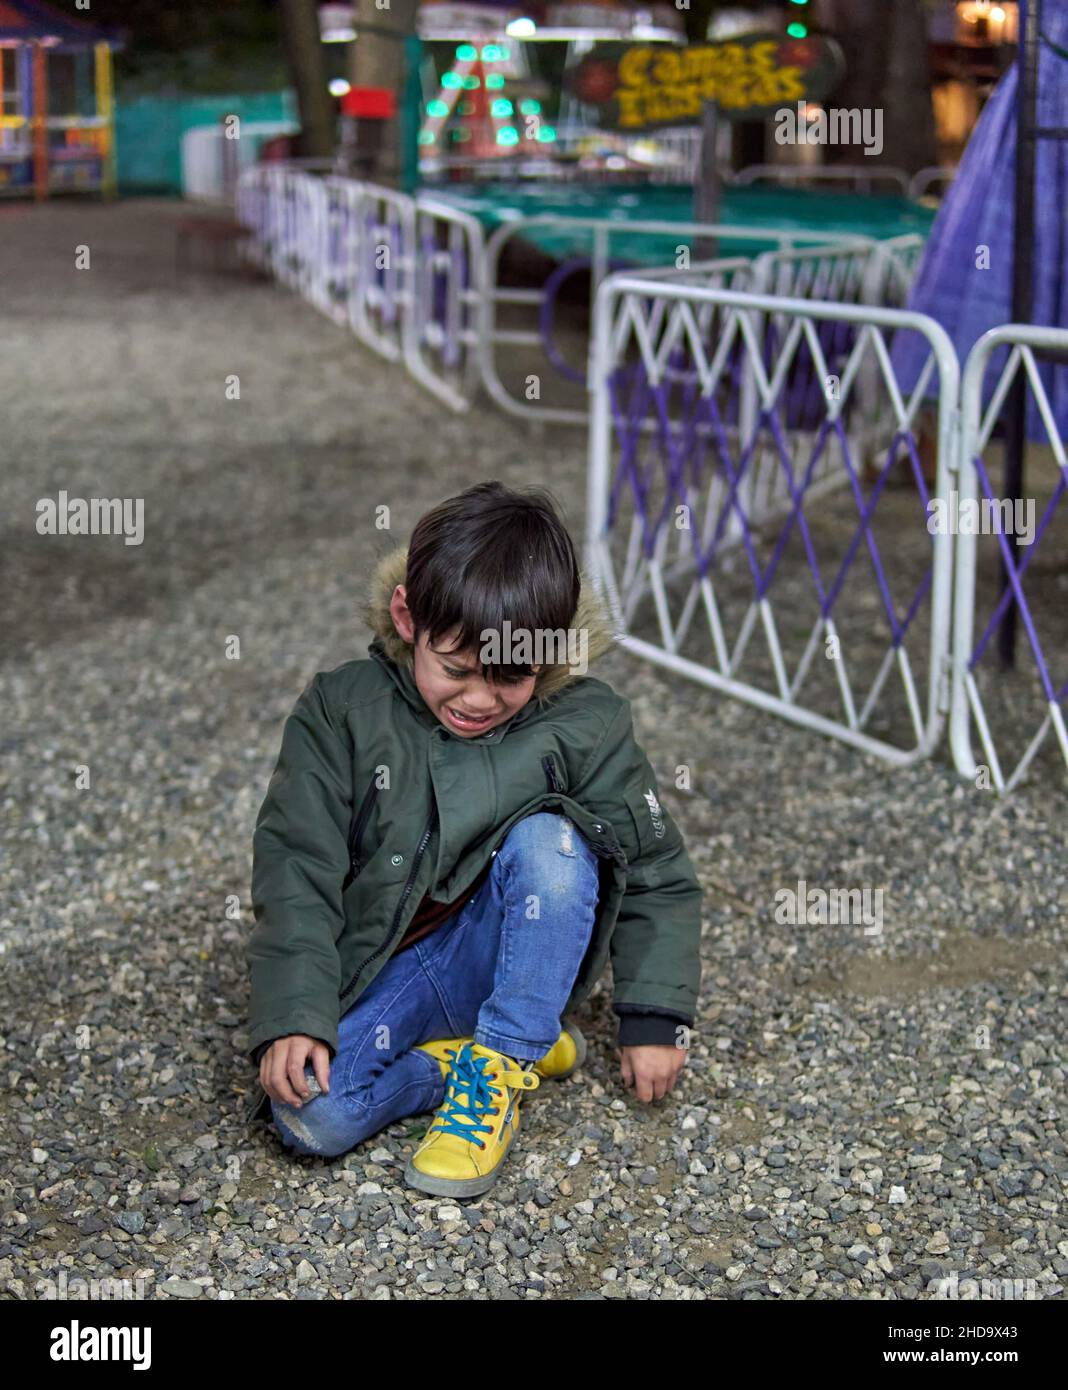 latin little boy looking down and crying in a park, maybe is lost. outdoors, distressed child sitting on pebbles. Argentina Stock Photo